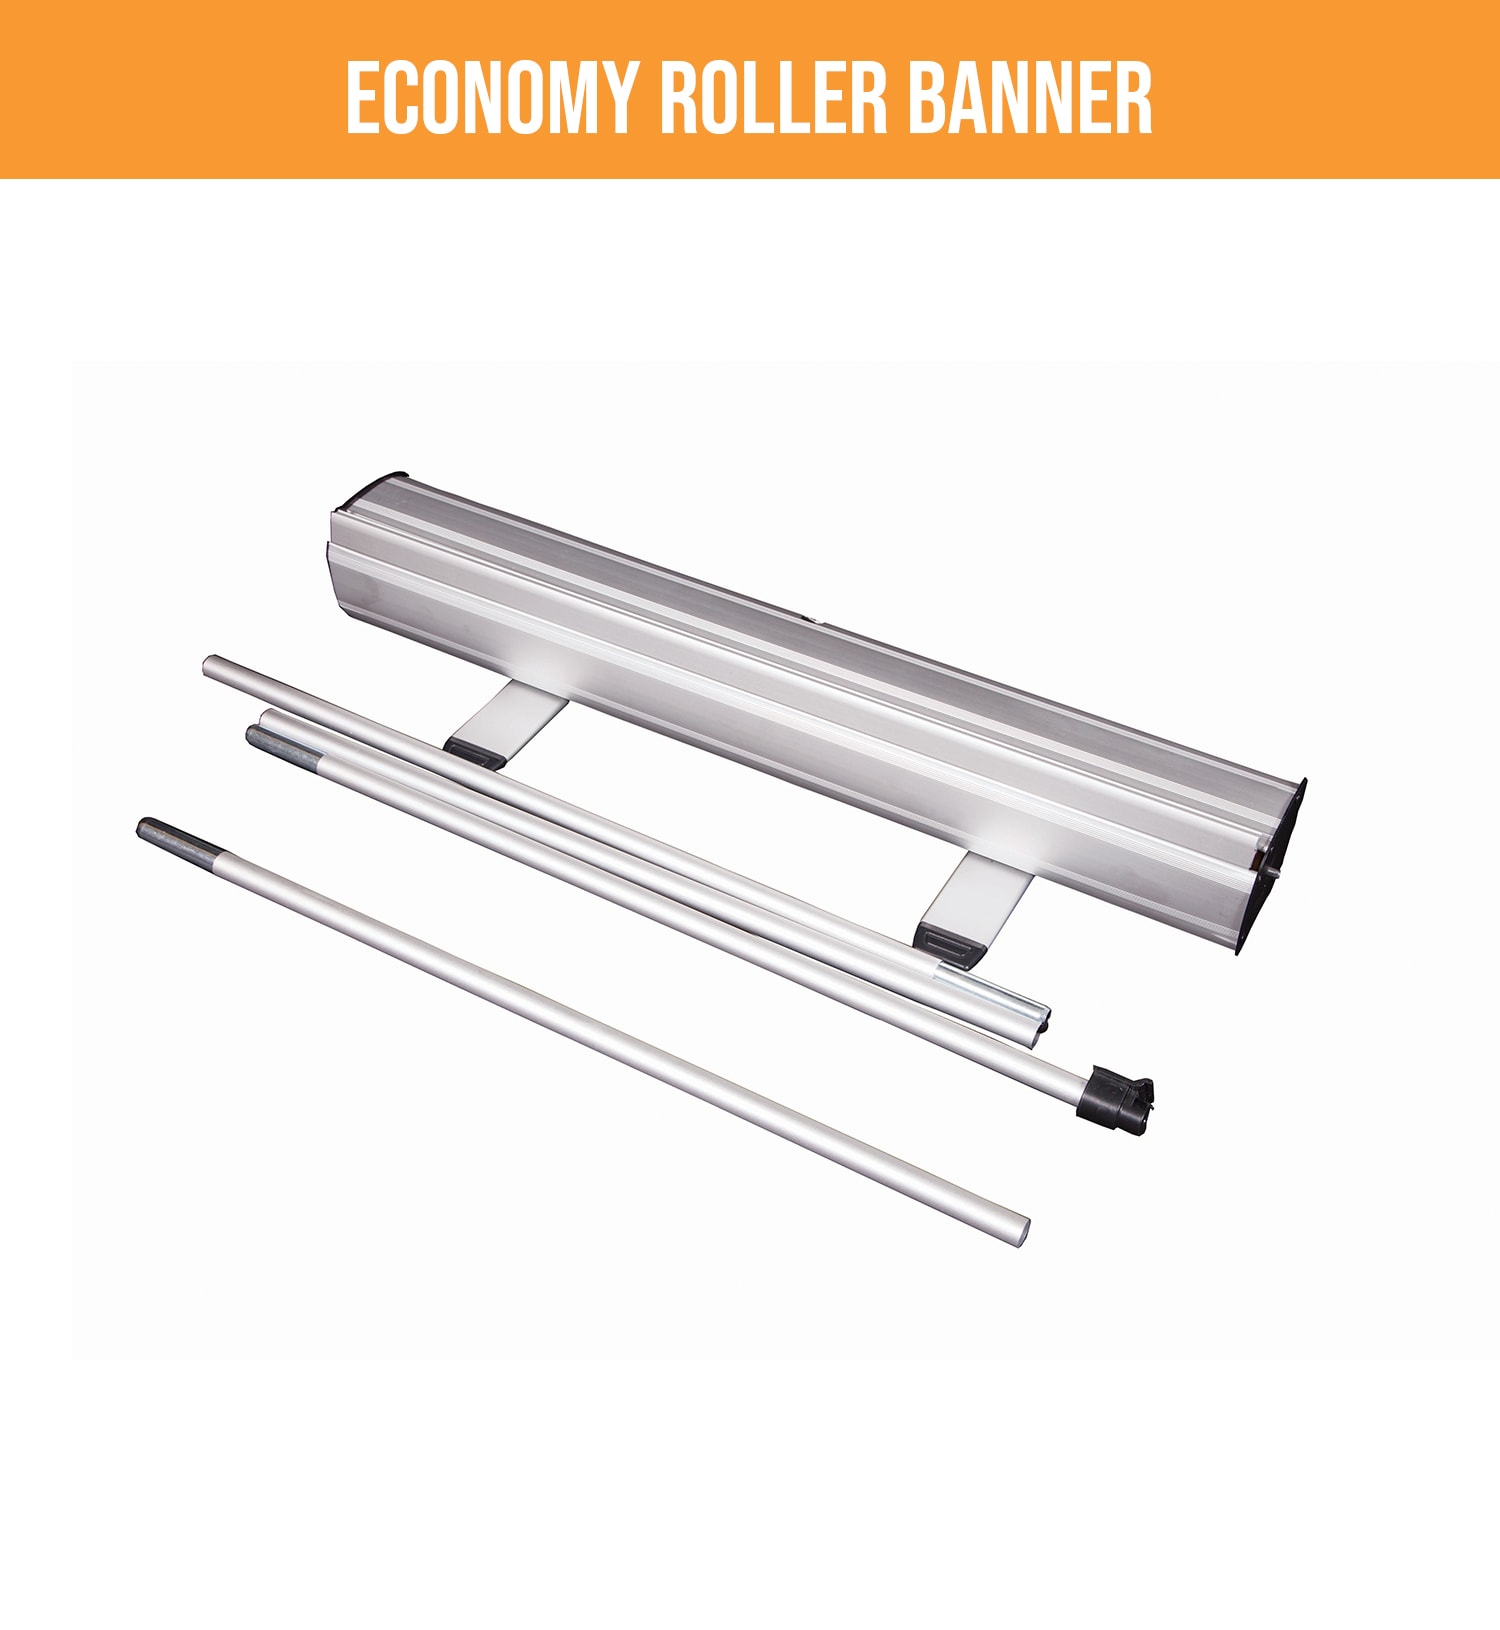 Economy Roller Banner stand and poles displayed for assembly.